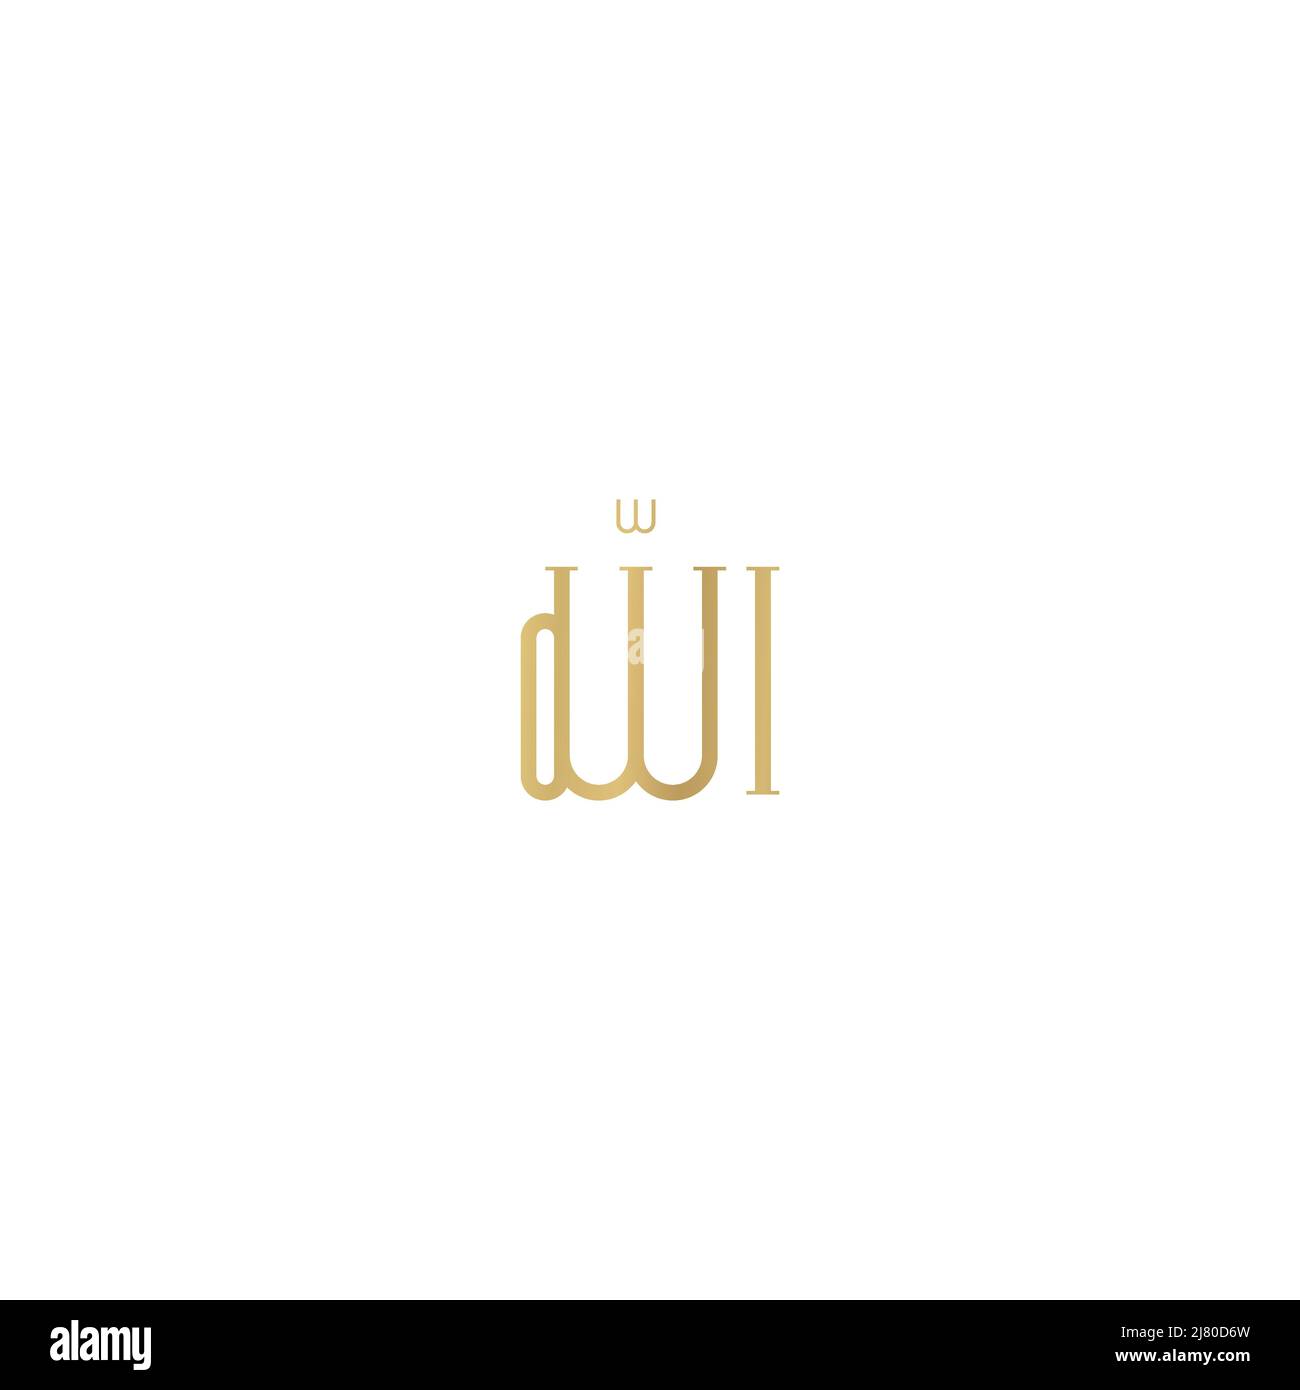 Allah is All-Powerful. Islamic calligraphy Name of Allah And Name of Prophet Muhamad Combined Vector Design Stock Vector